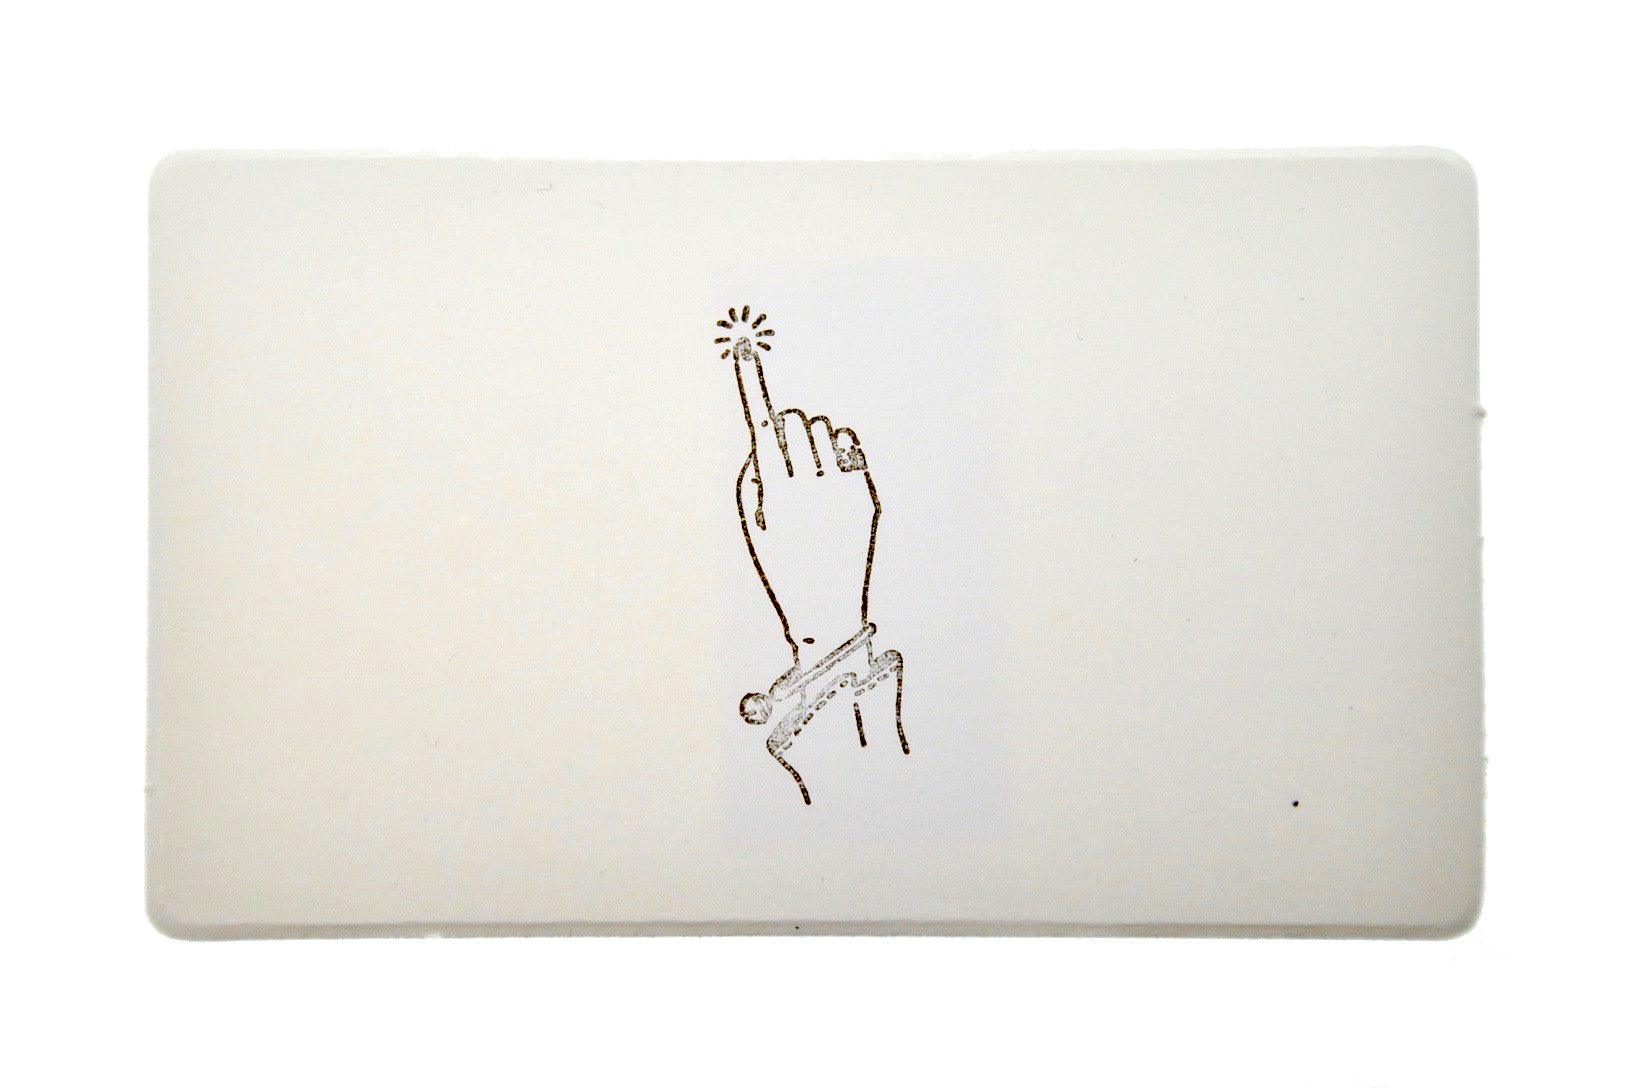 Hand Gesture Rubber Stamp | Touch - Backtozero B20 - hand, hand gesture, handgesture, hands, rubber stamp